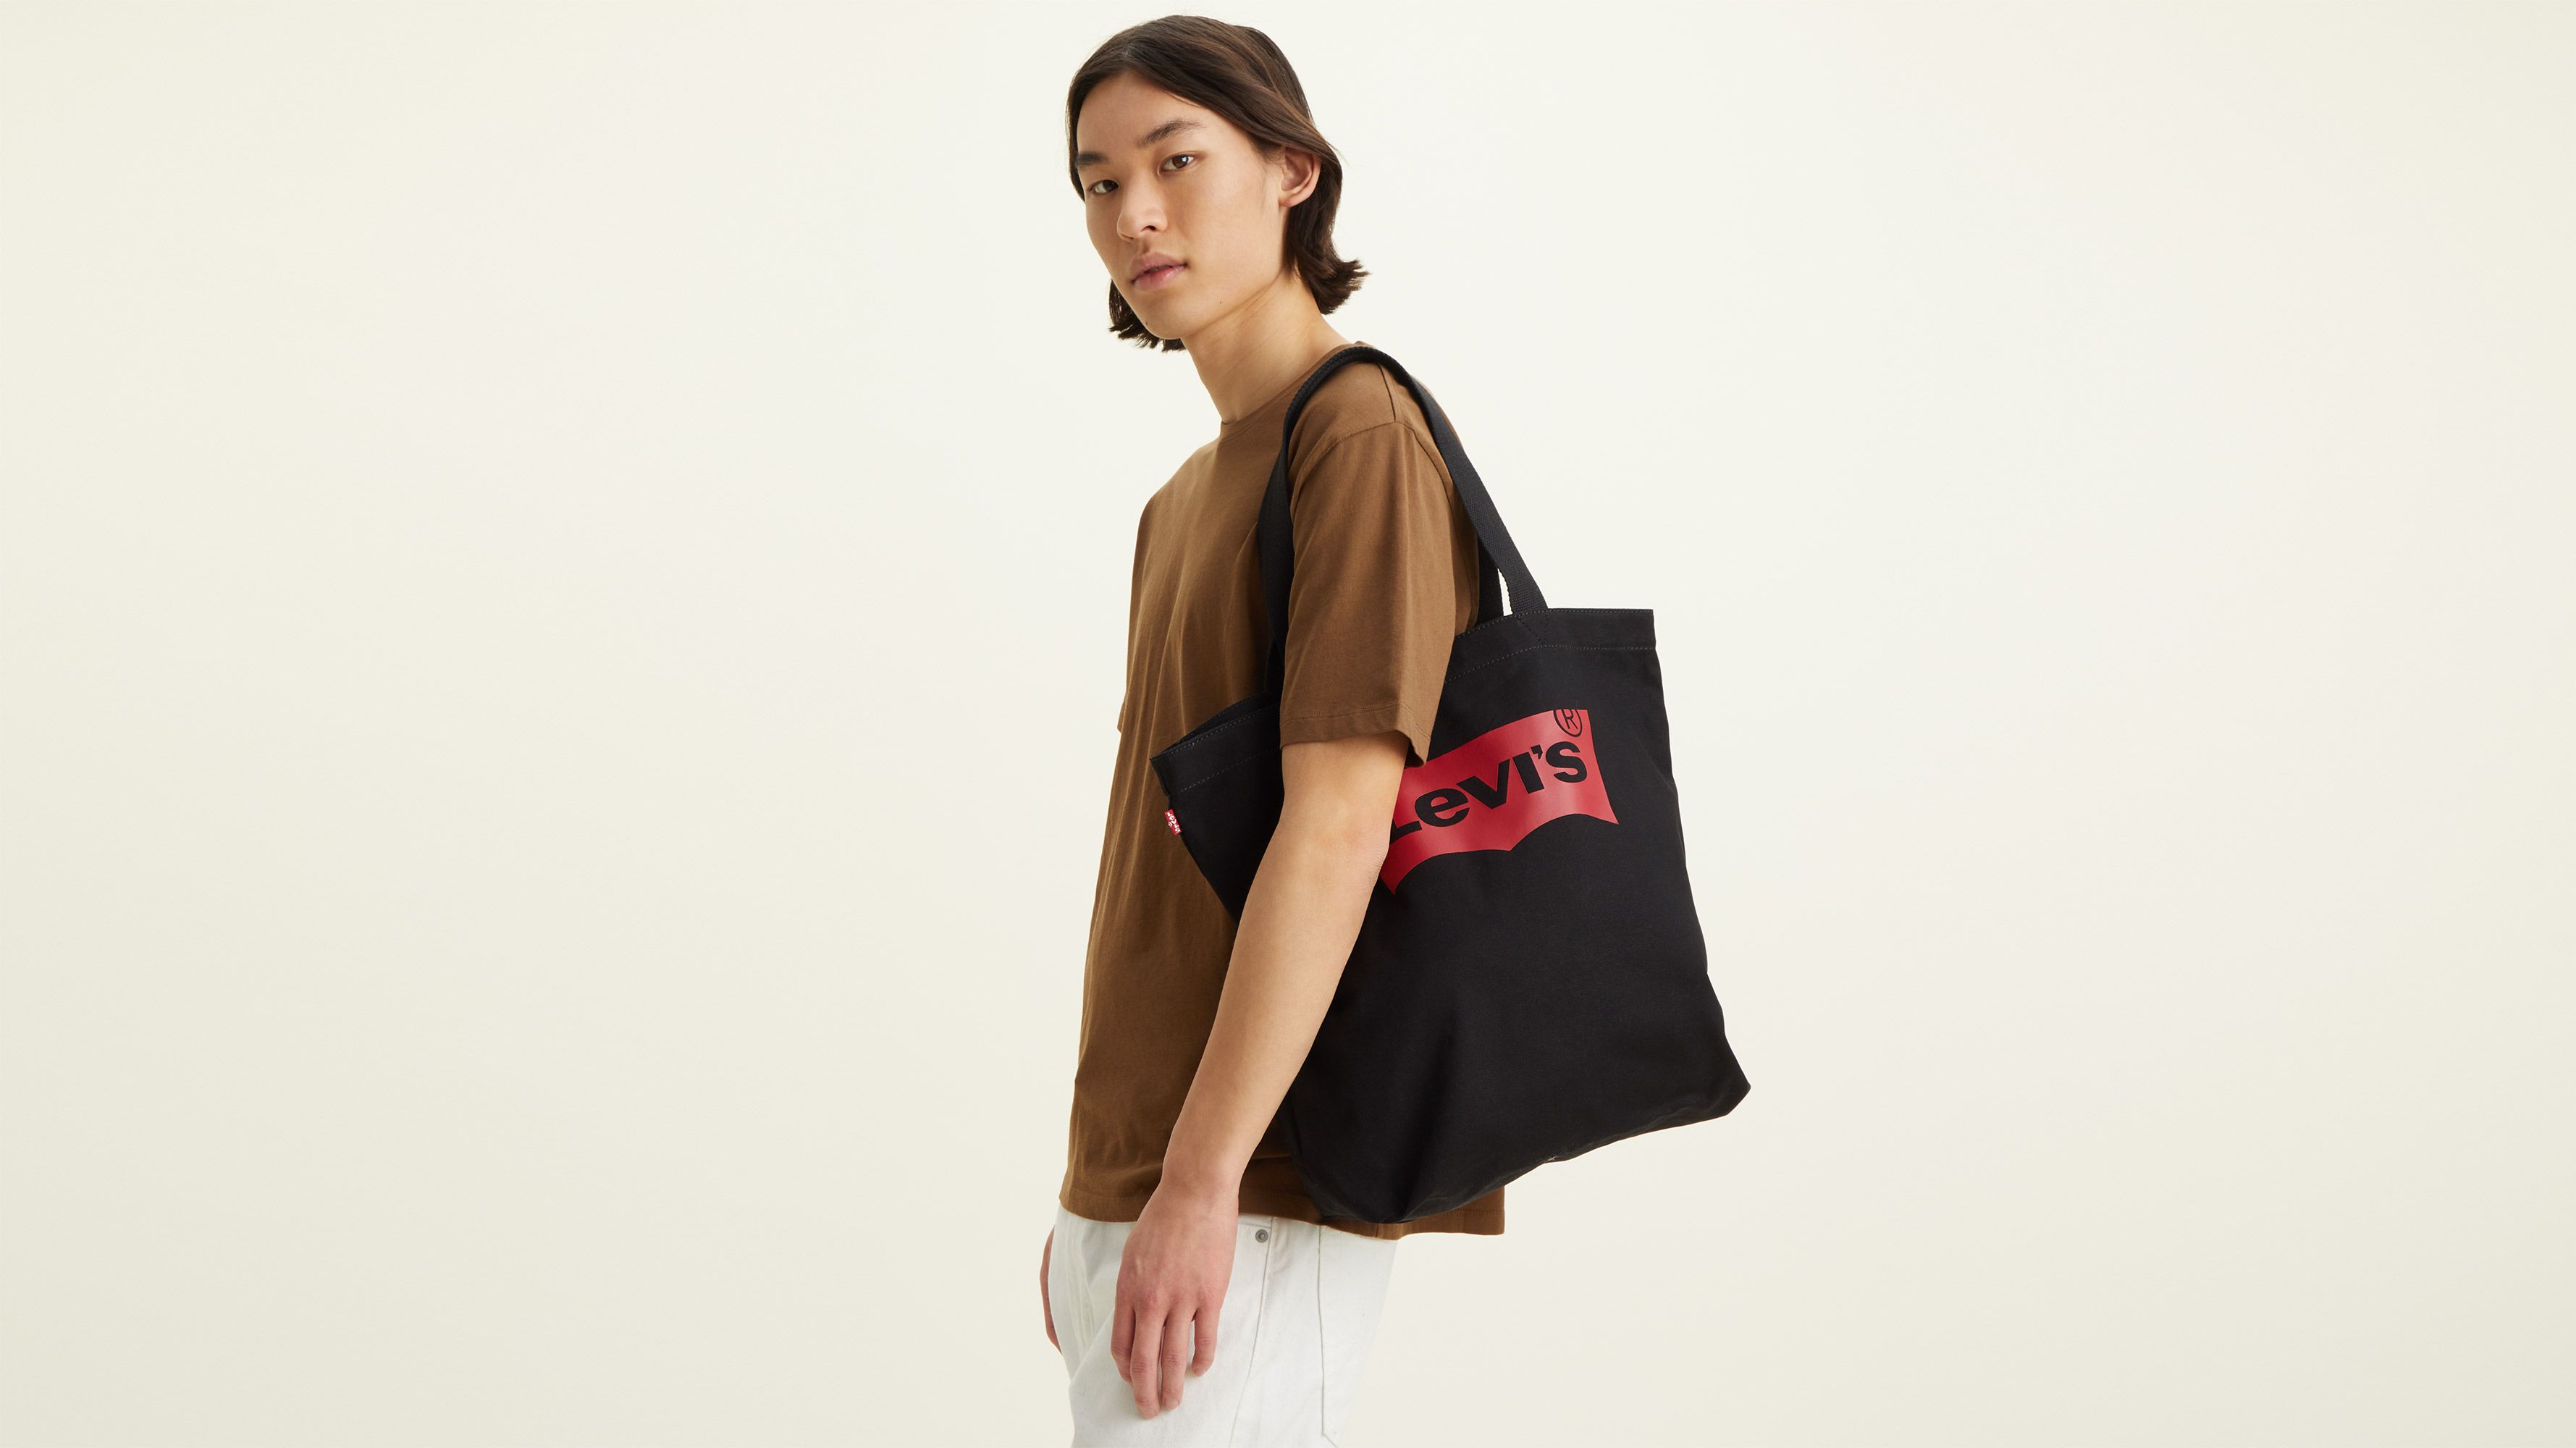 batwing tote levis